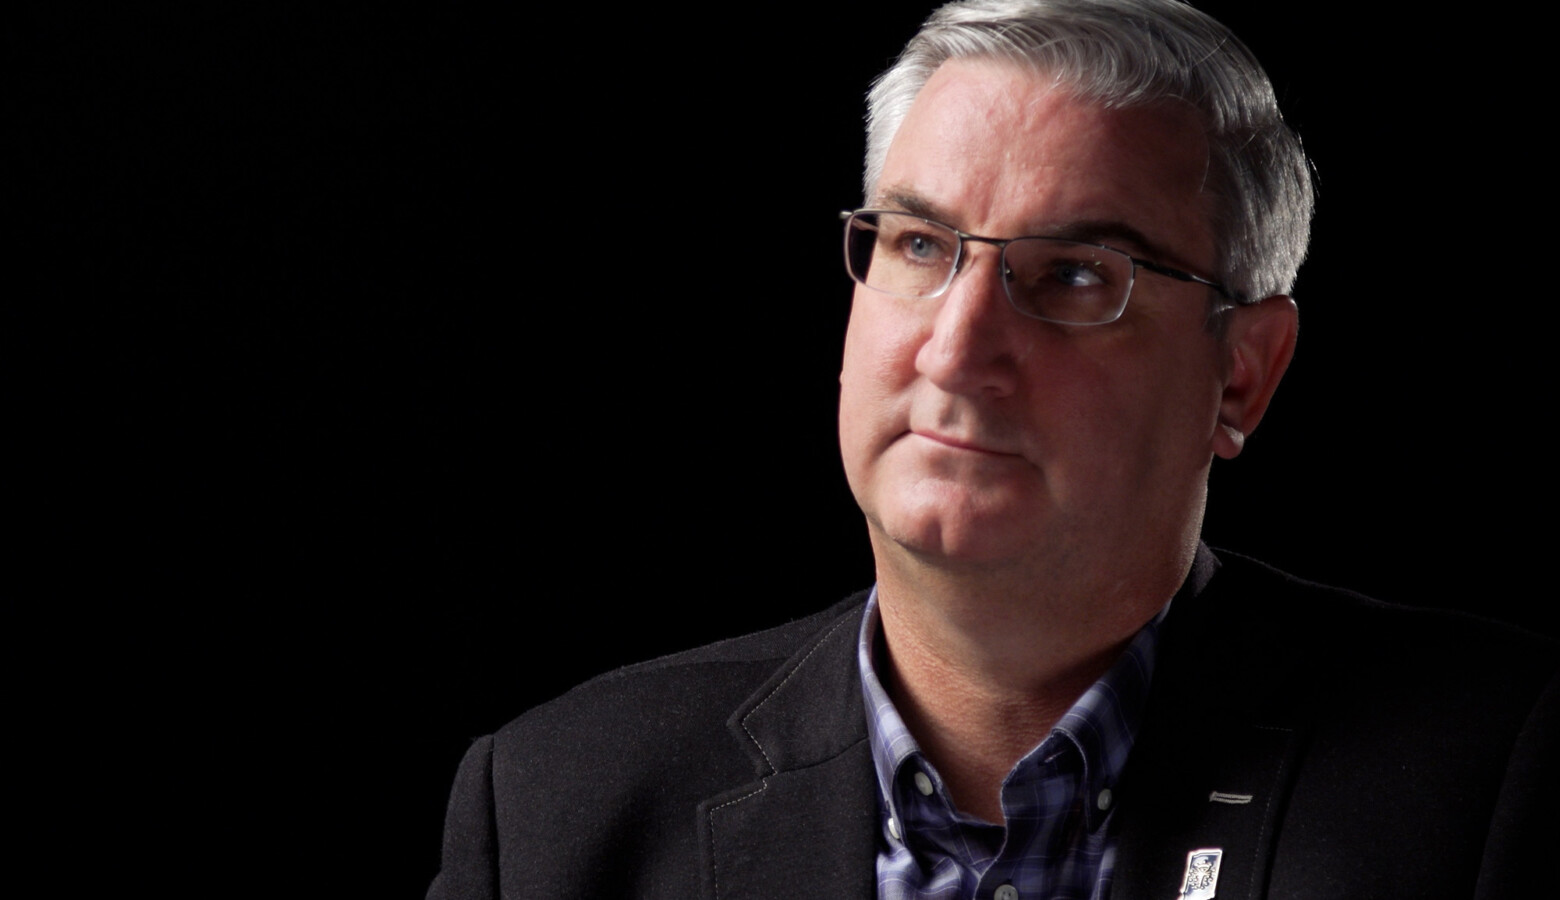 Gov. Eric Holcomb is running for a second term and looks to continue Republican control of the governor's office that stretches back to 2005. (Alan Mbathi/IPB News)